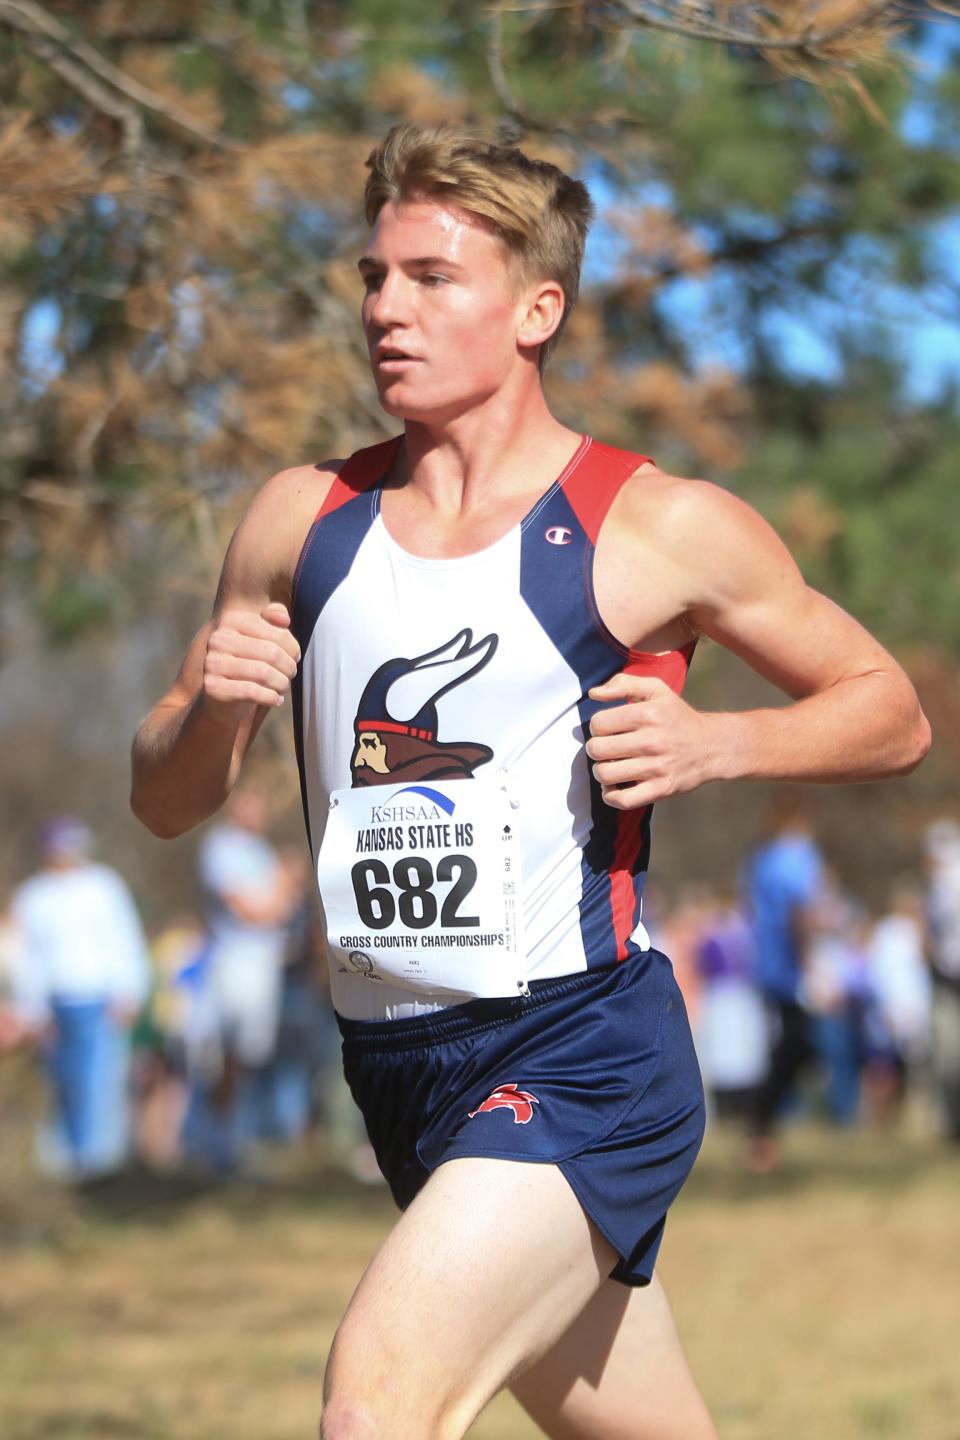 Zach Jowers is a freshman at the Air Force Academy where he has been training for the Boston Marathon. The Seaman graduate competed in the 2022 cross county state championship.